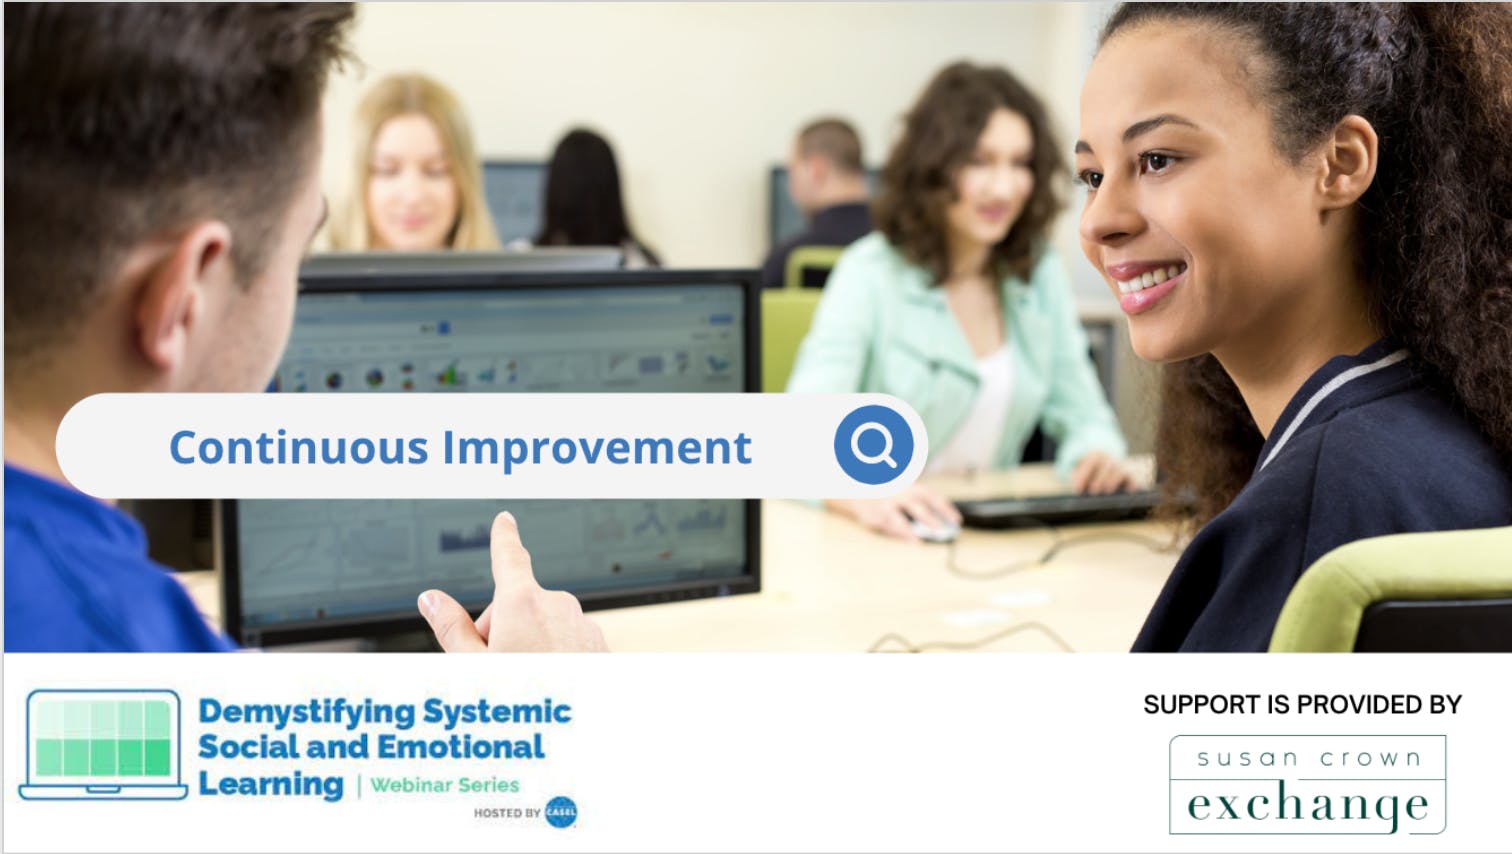 Demystifying Systemic Social and Emotional Learning: Continuous Improvement